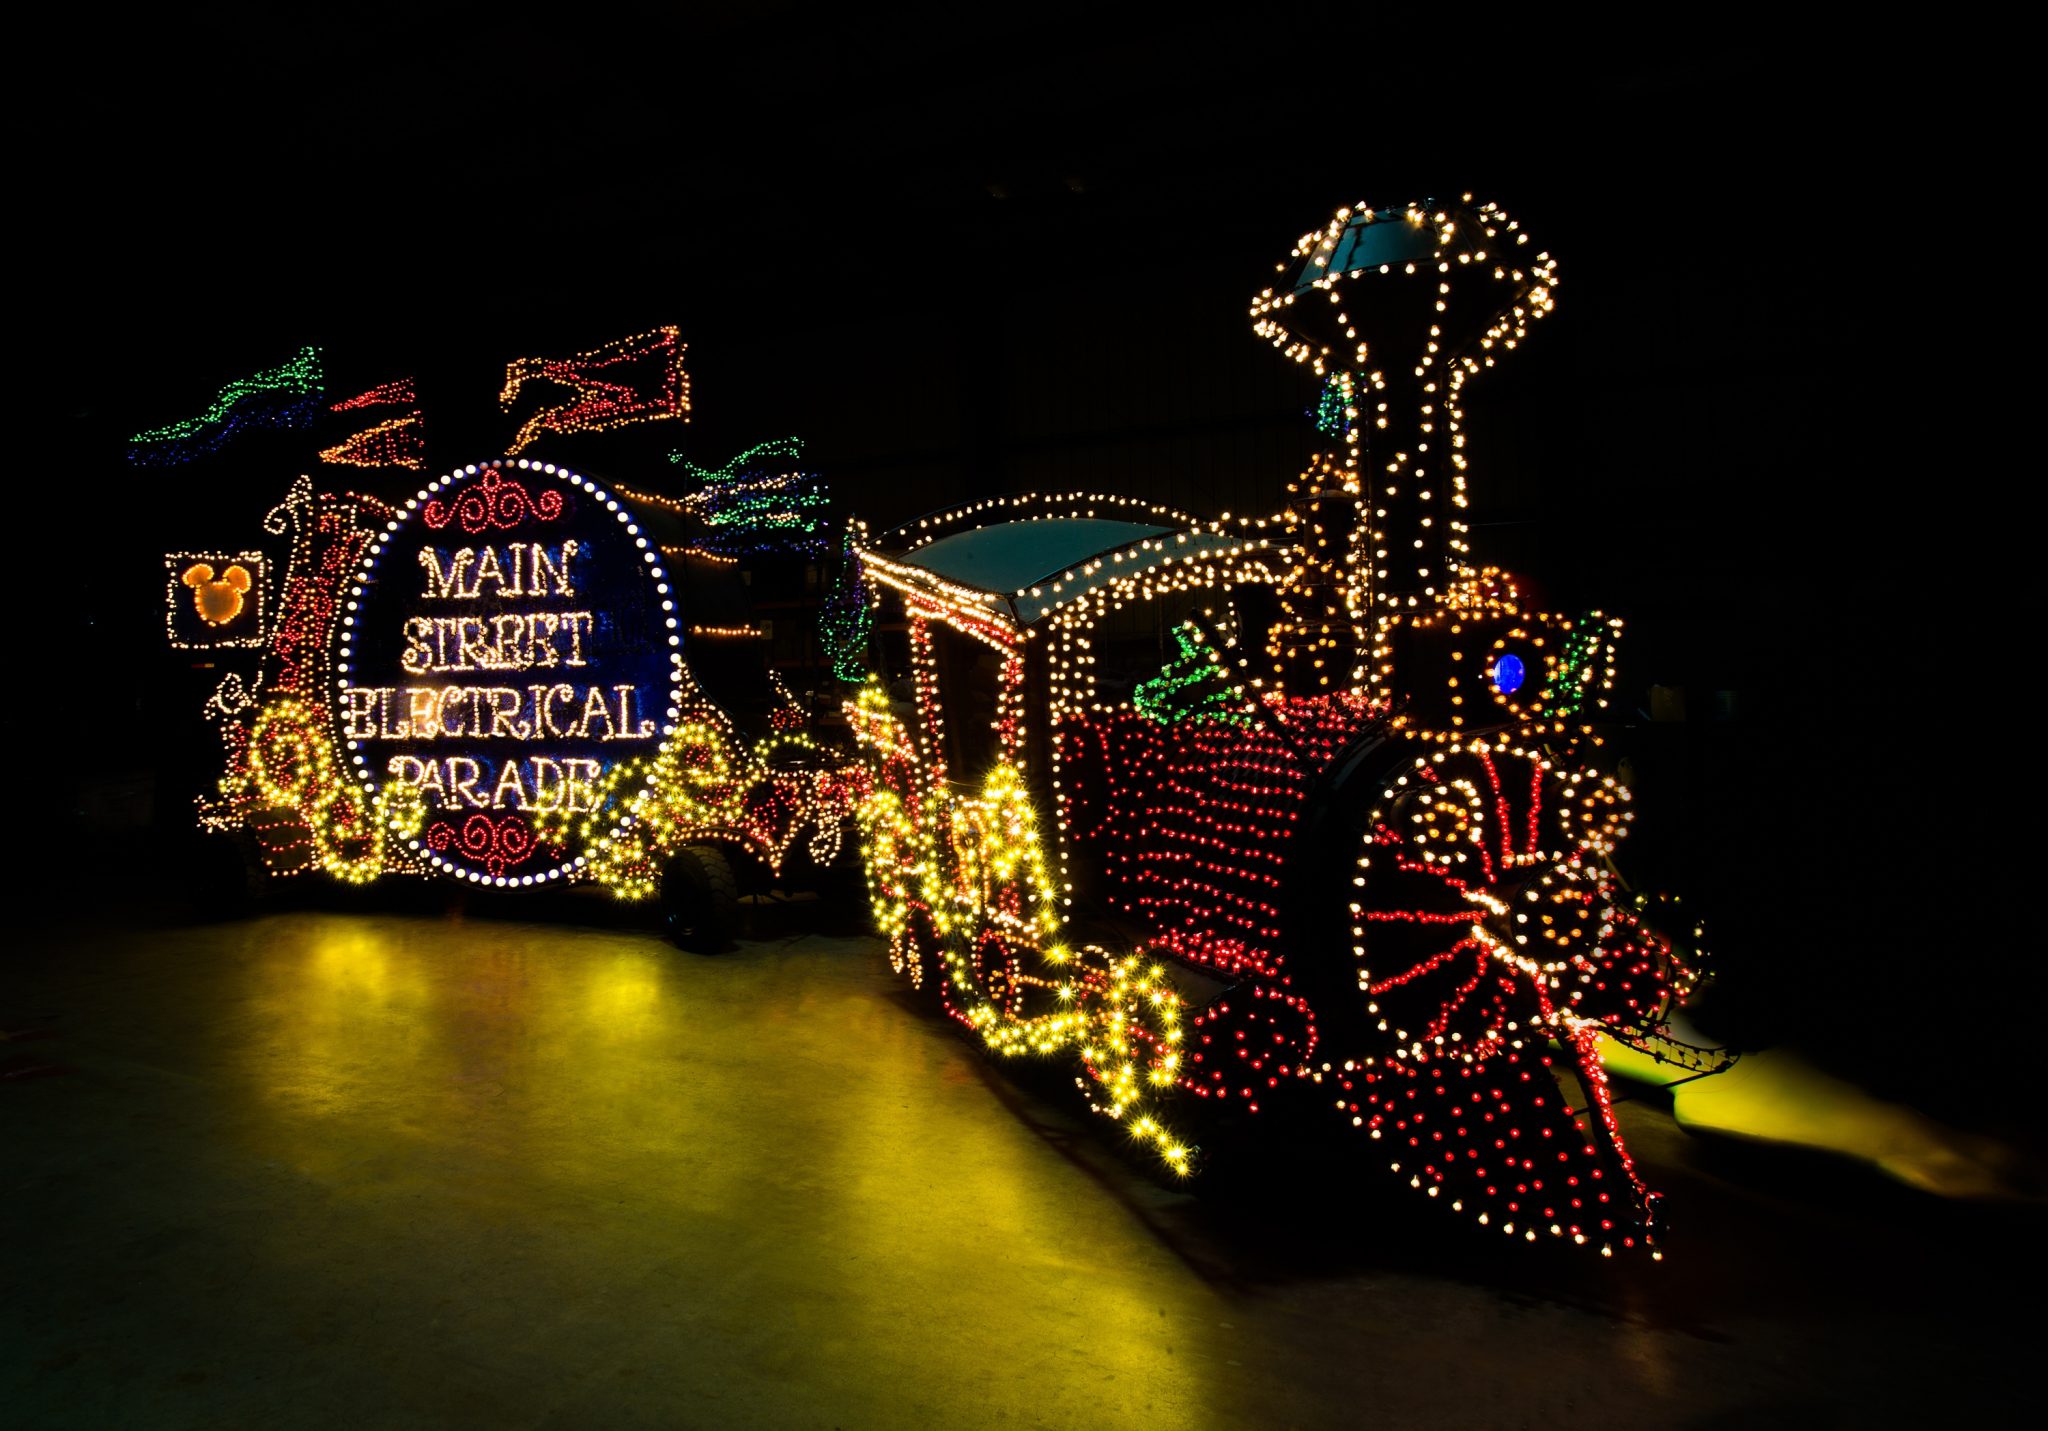 Did You Know? – Facts About the Disneyland Main Street Electrical Parade